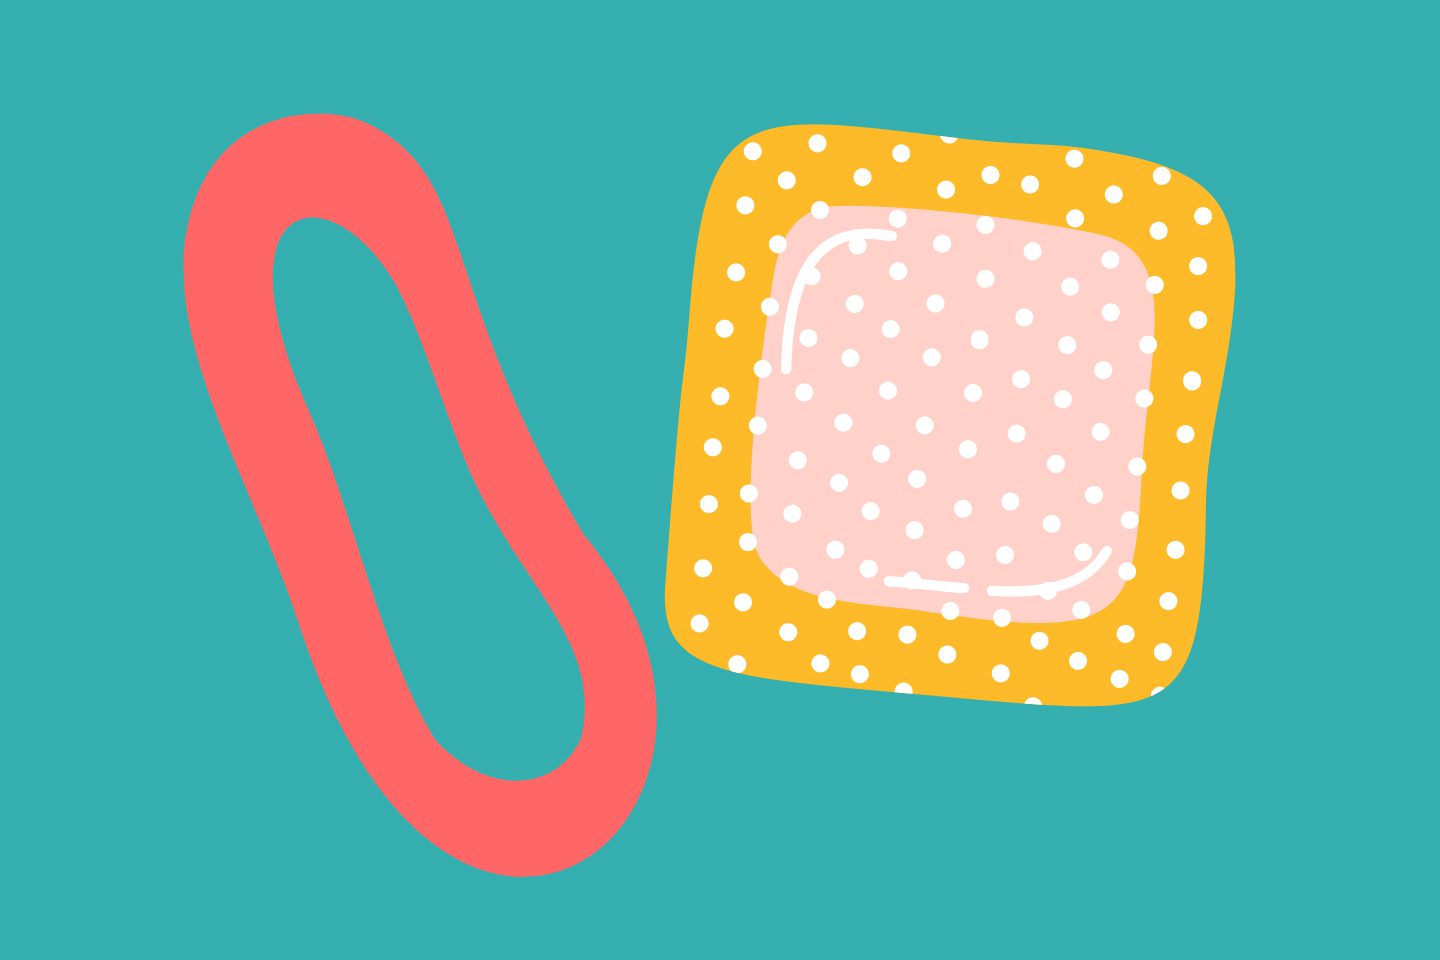 birth control patch and vaginal ring illustrations